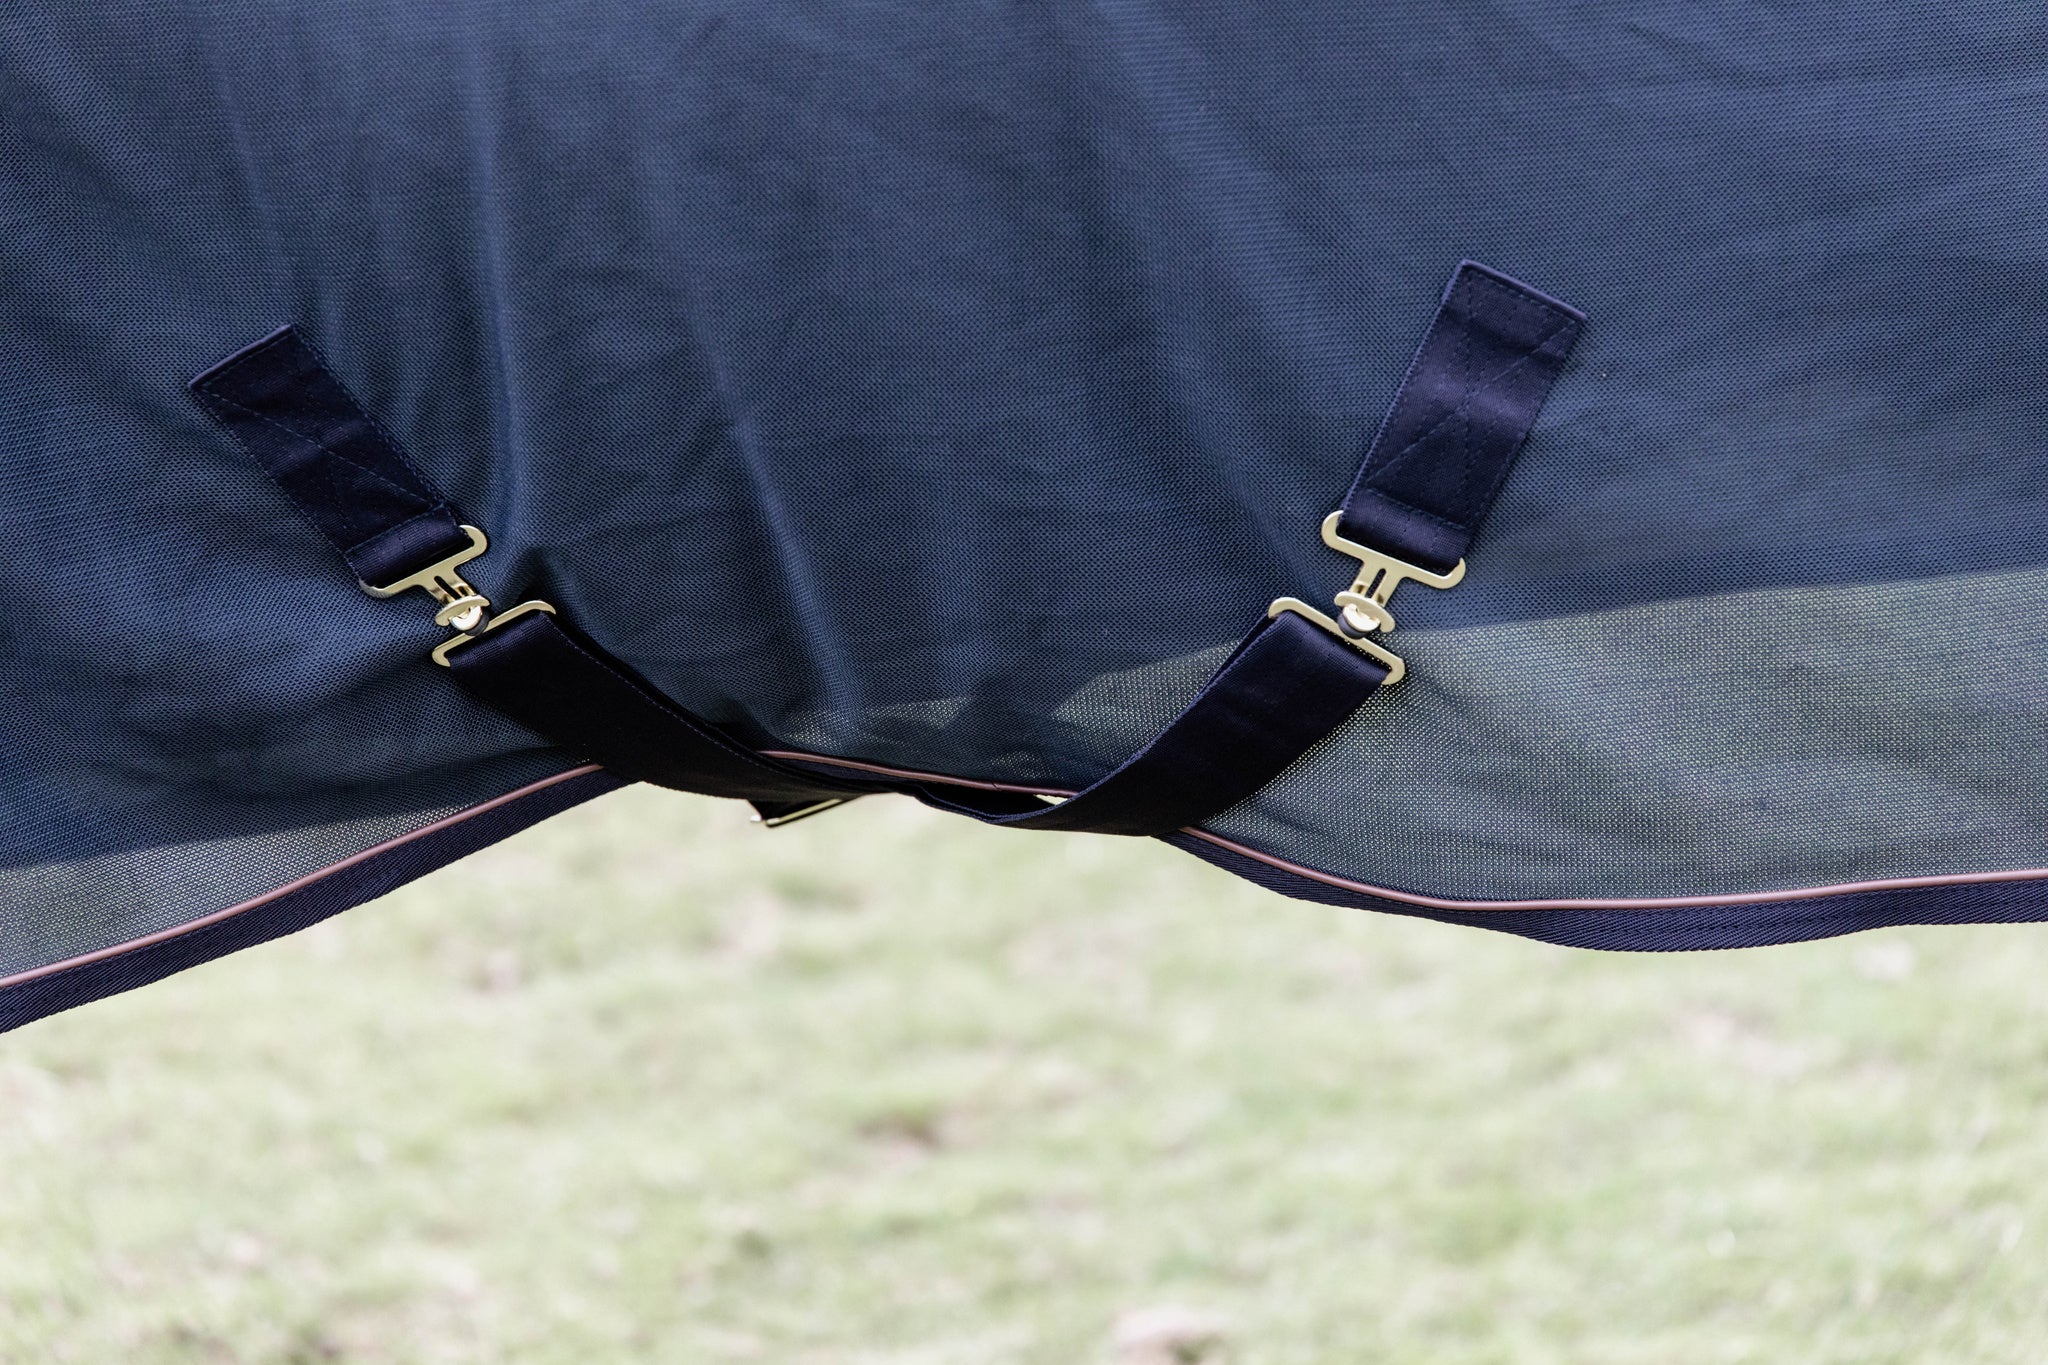 The Waterproof combo fly rug classic protects your horse from flies and rain. The rug is therefore perfect for rainy, yet warmer days from spring through fall. The combination of materials make the rug extremely breathable, so your horse will be comfortable at all times.